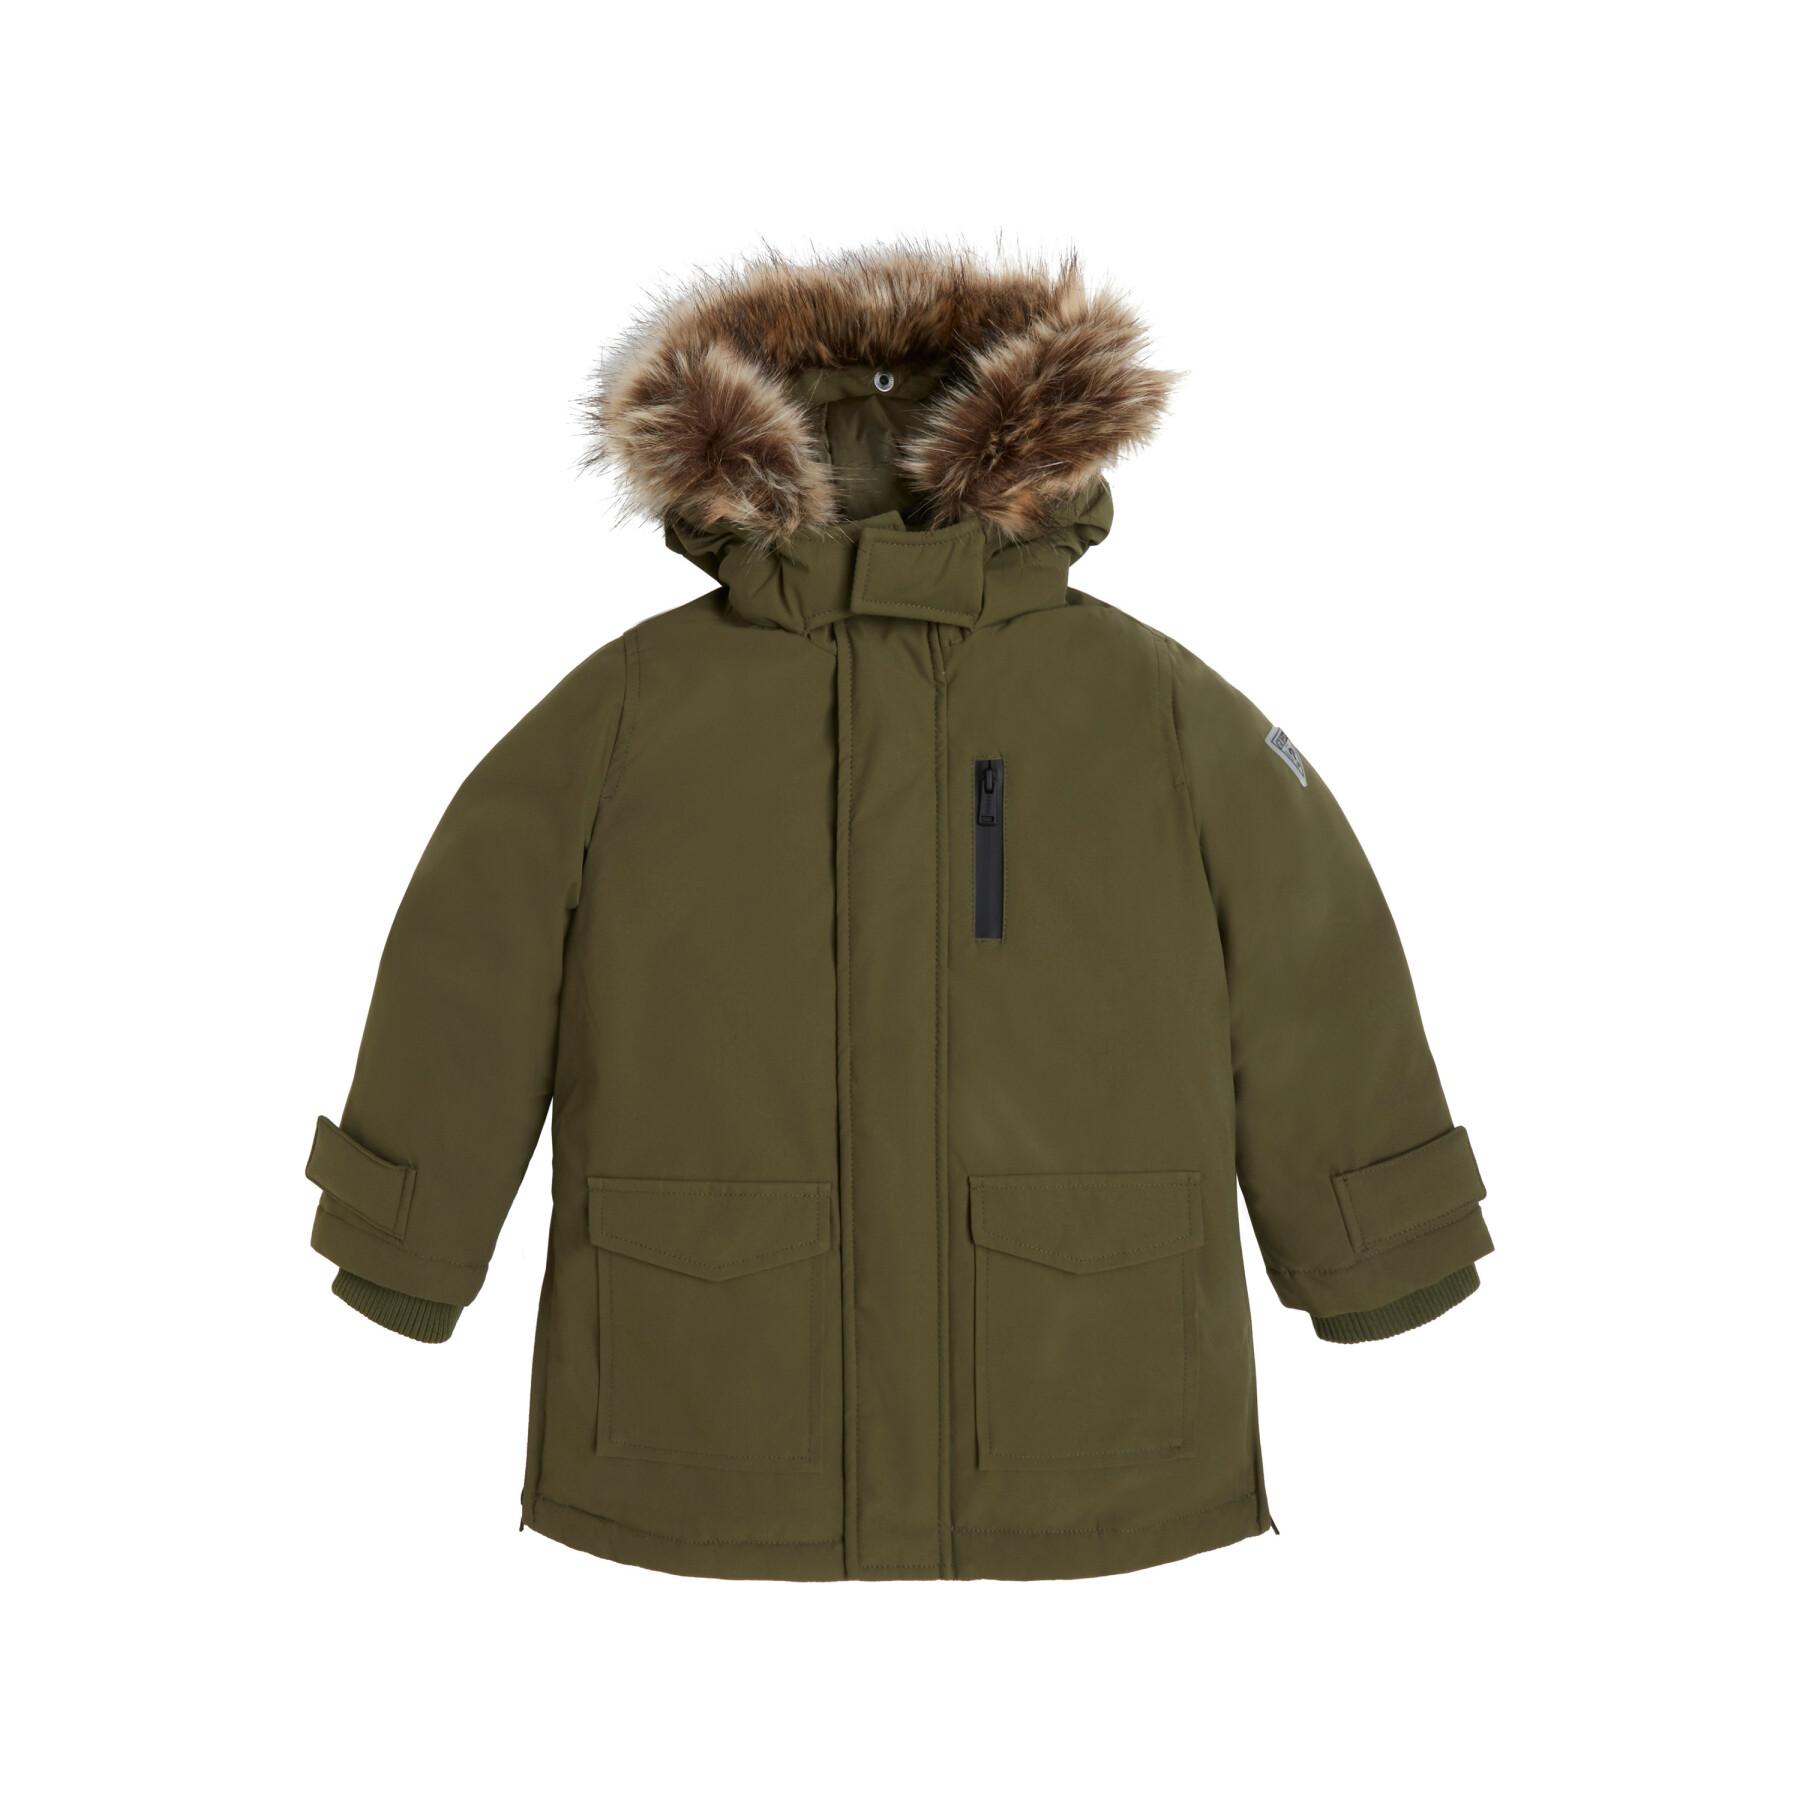 Fake fur hooded parka for kids Guess